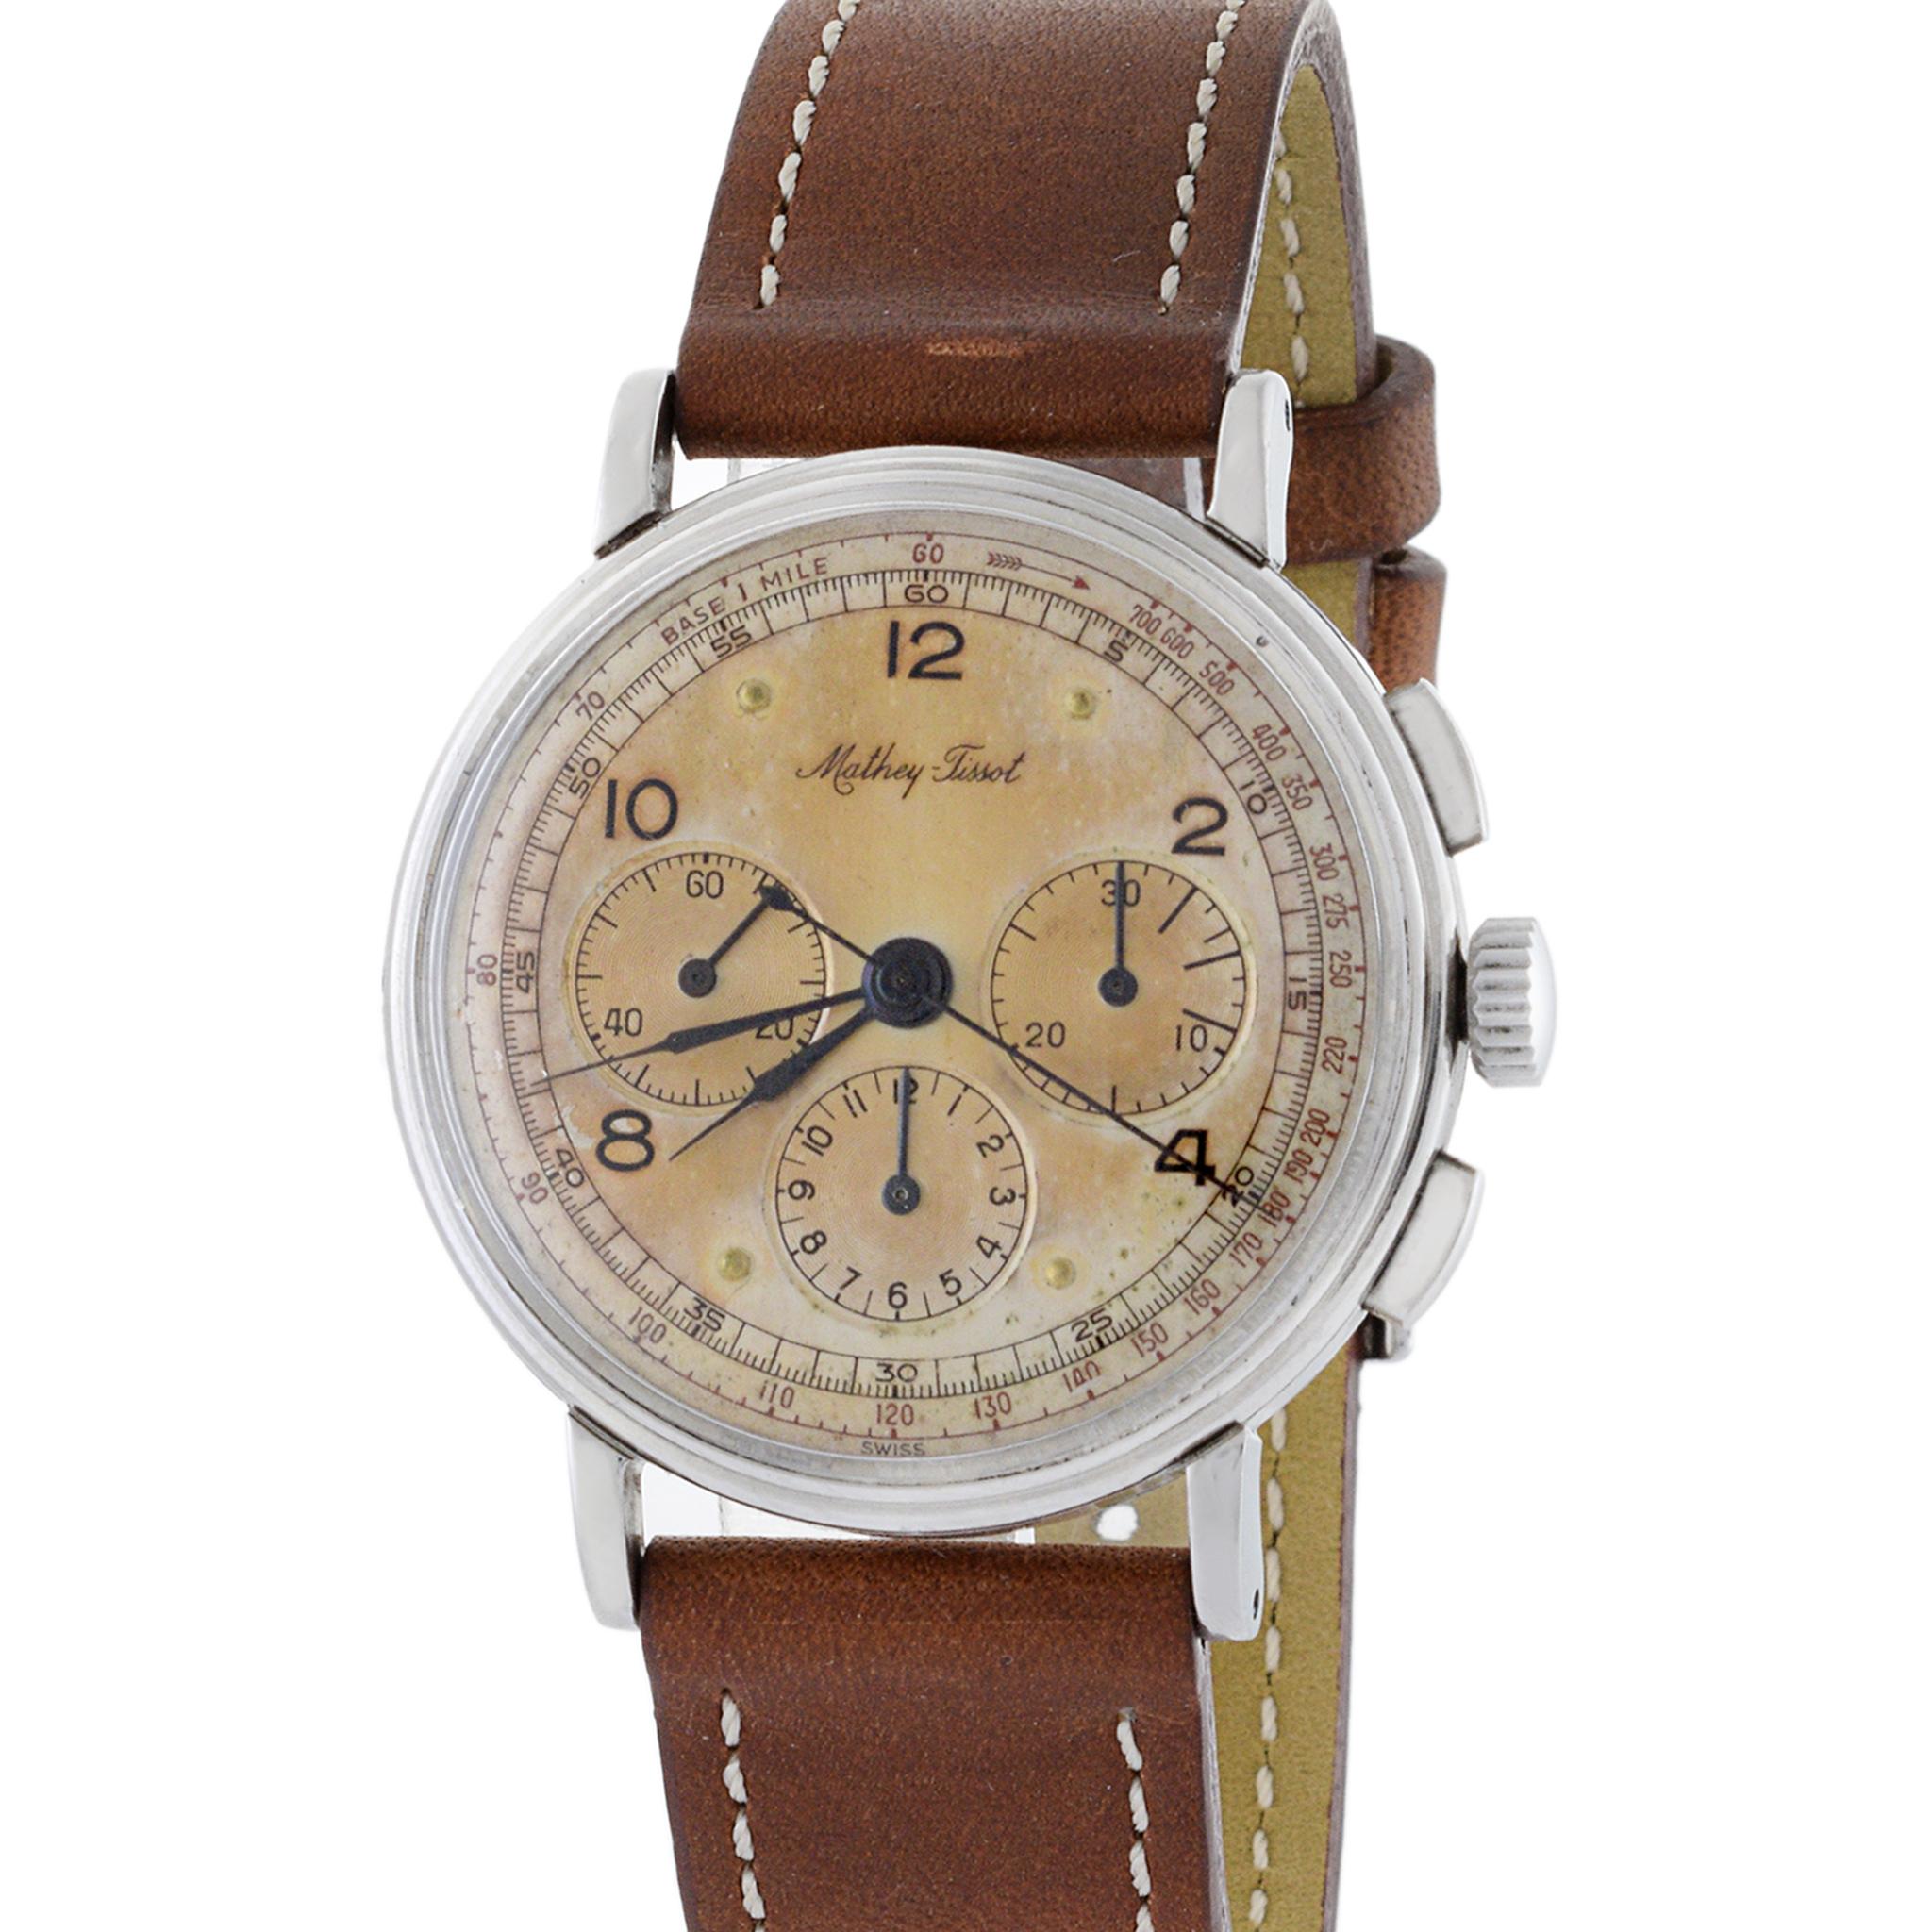 Mathey Tissot 1940's Stainless Steel Chronograph In Good Condition For Sale In New York, NY